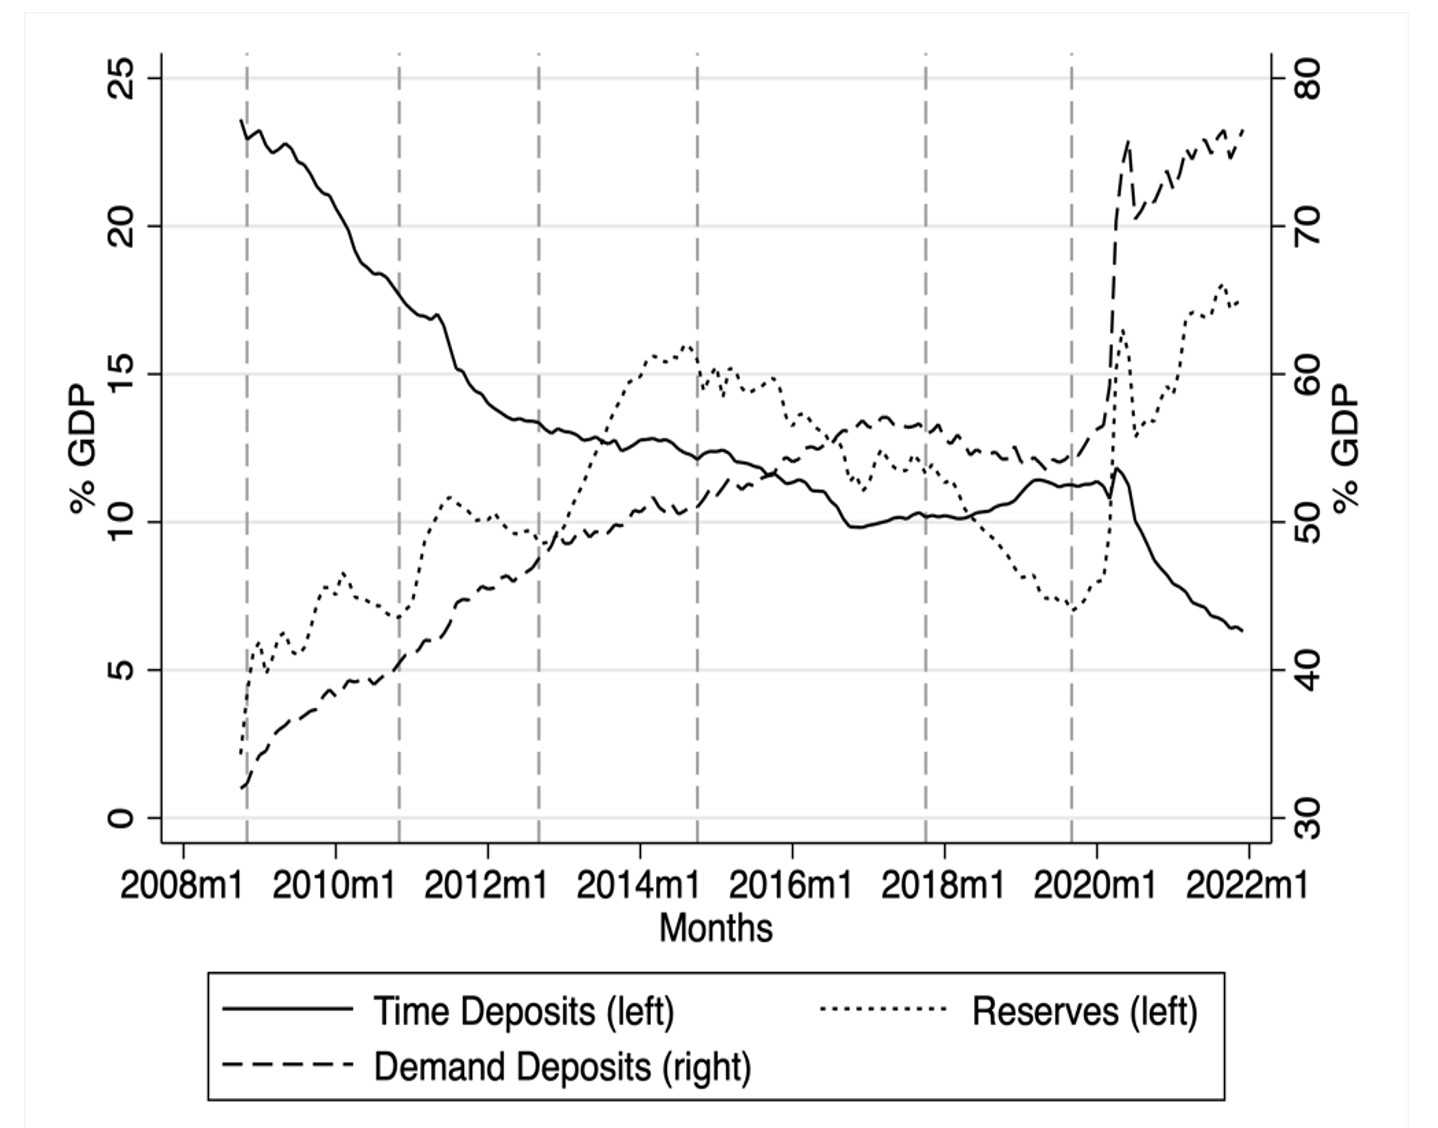 B) Demand (and other liquid) deposits, time deposits, and reserves as percentage of GDP